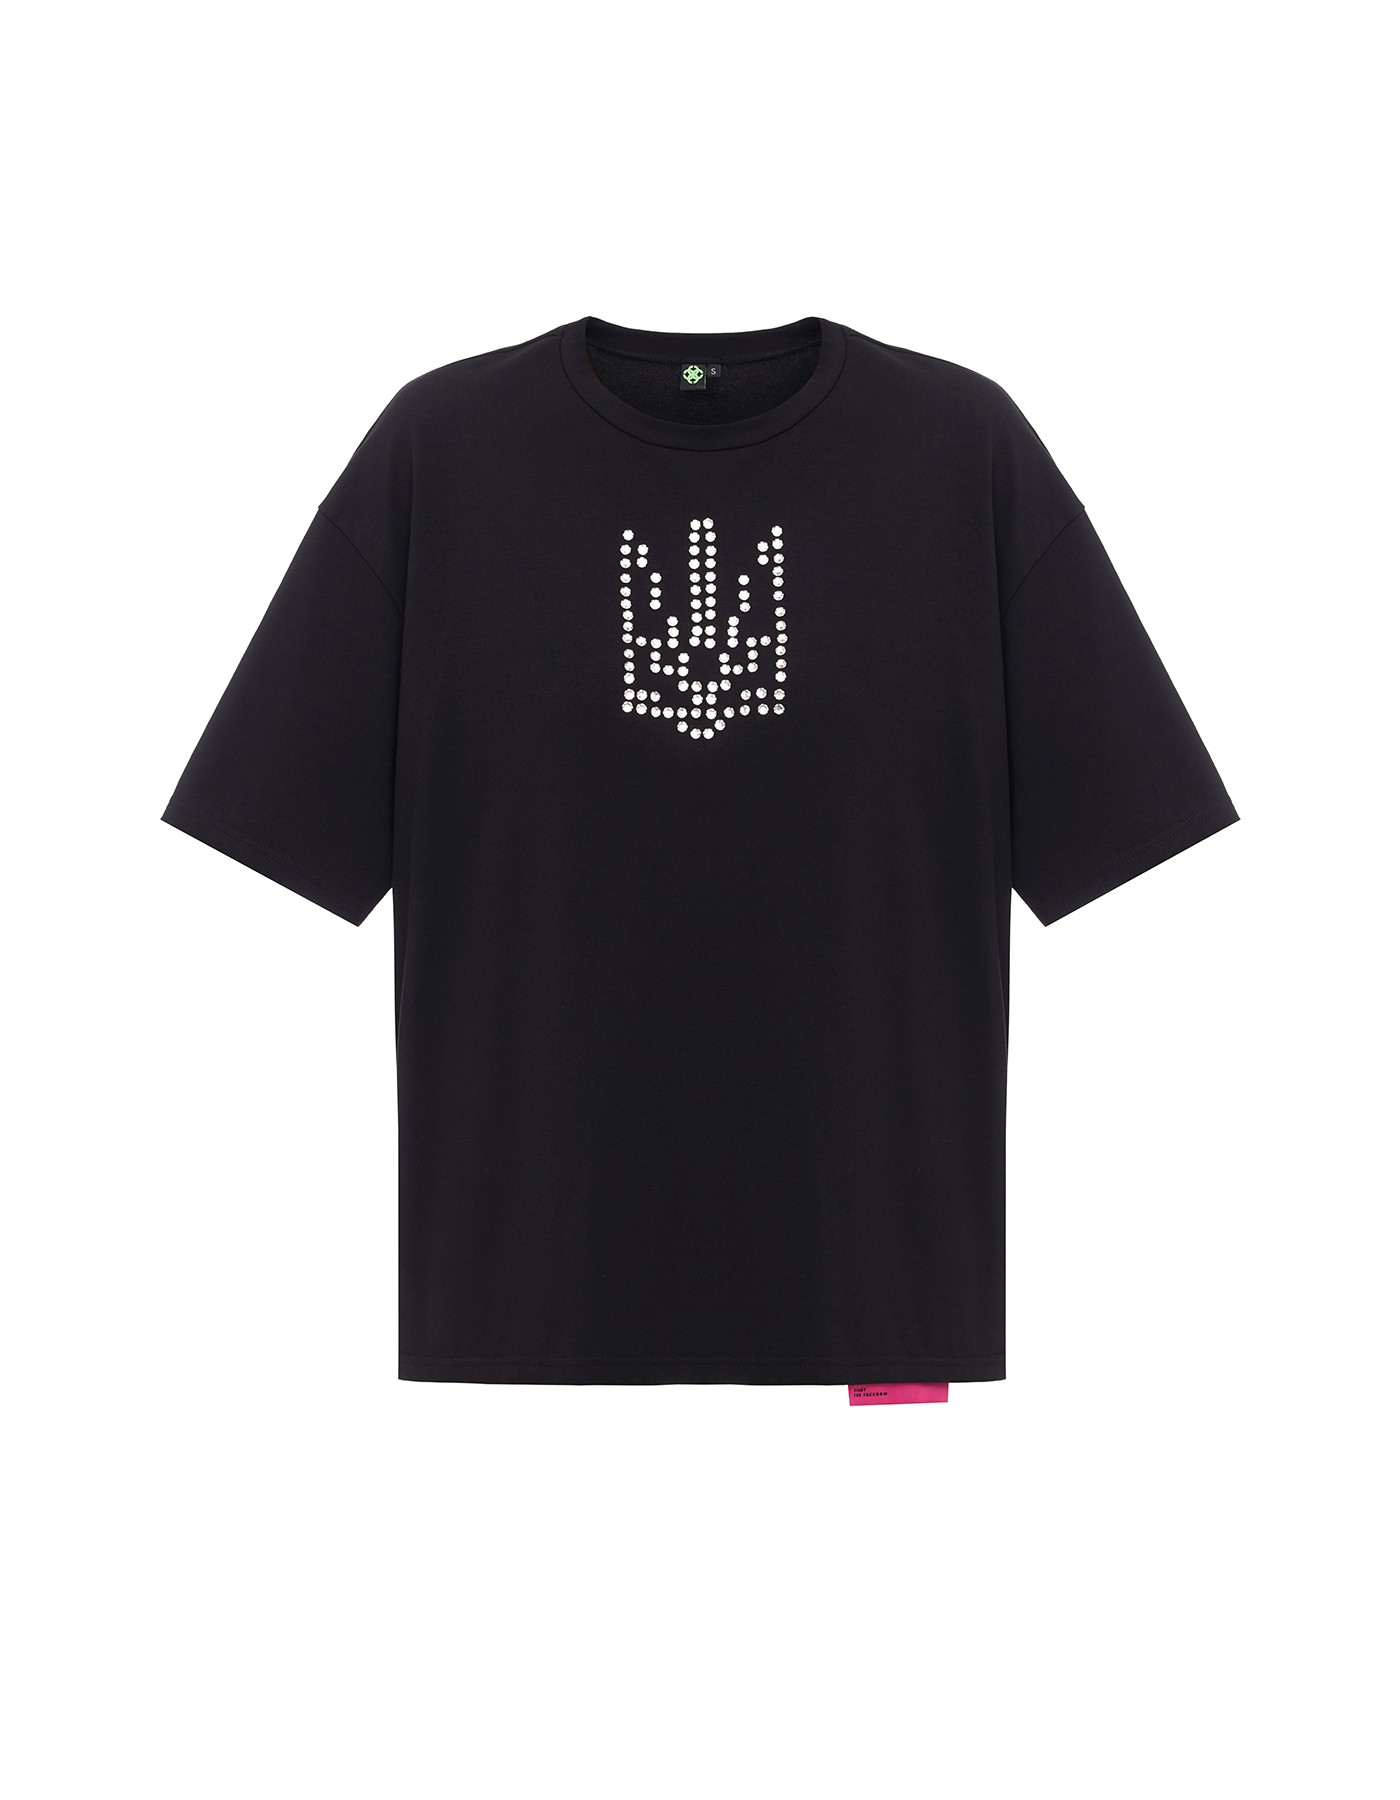 Tryzub t-shirt with crystals